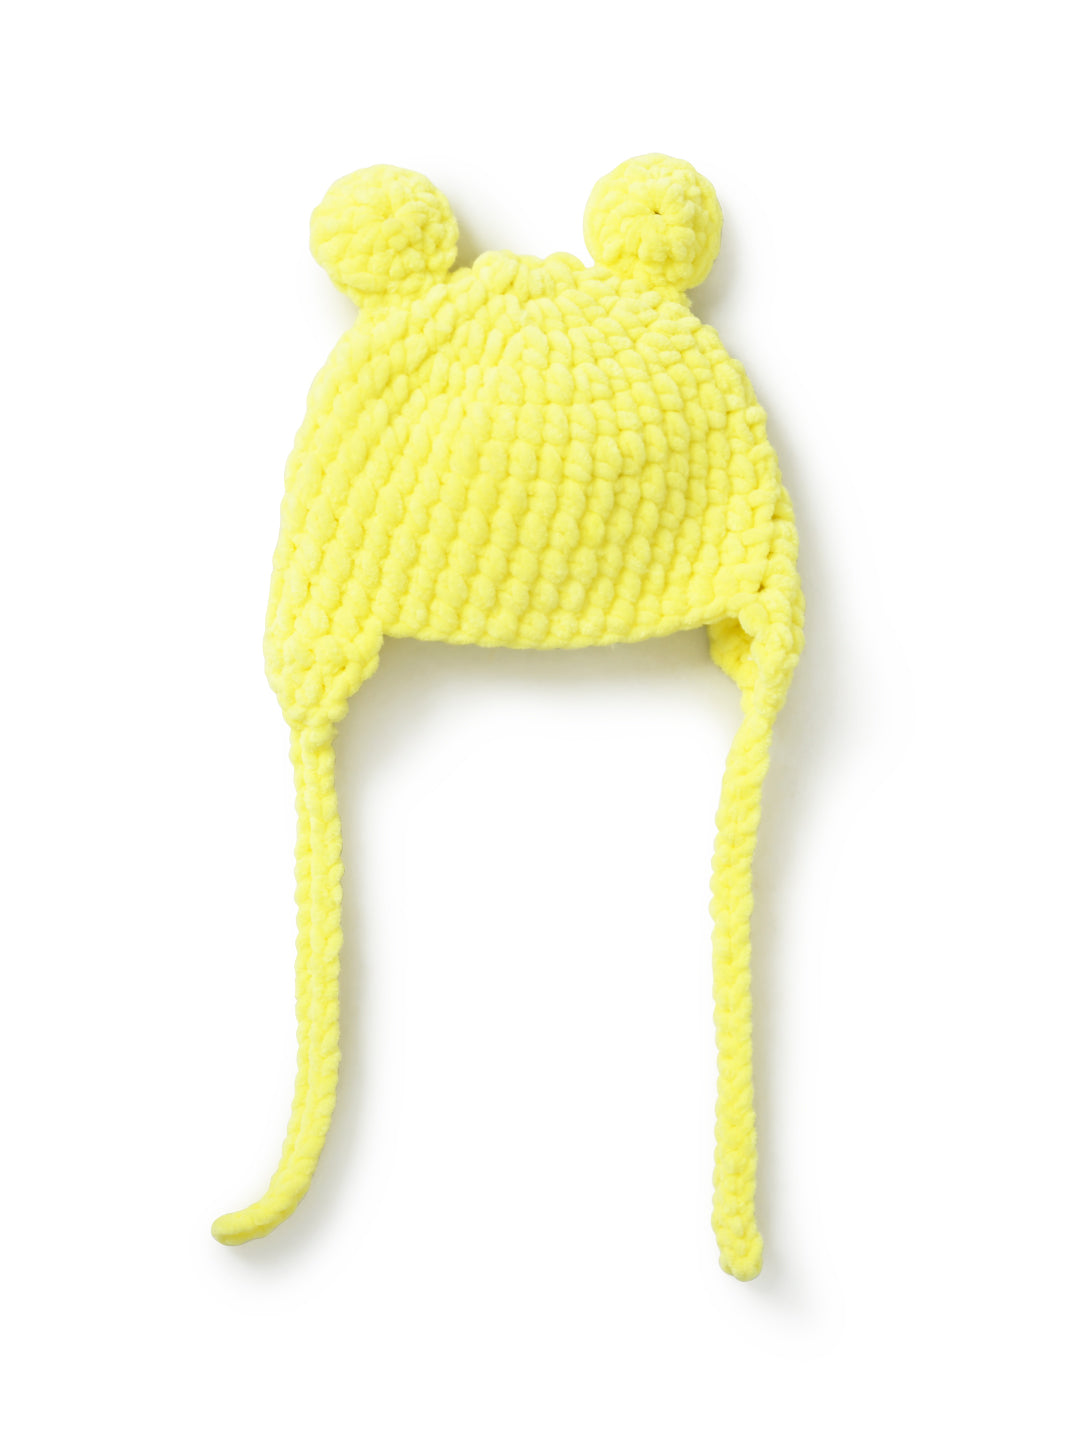 Pack of 2 White & Yellow Soft Woolen Cap for Kids